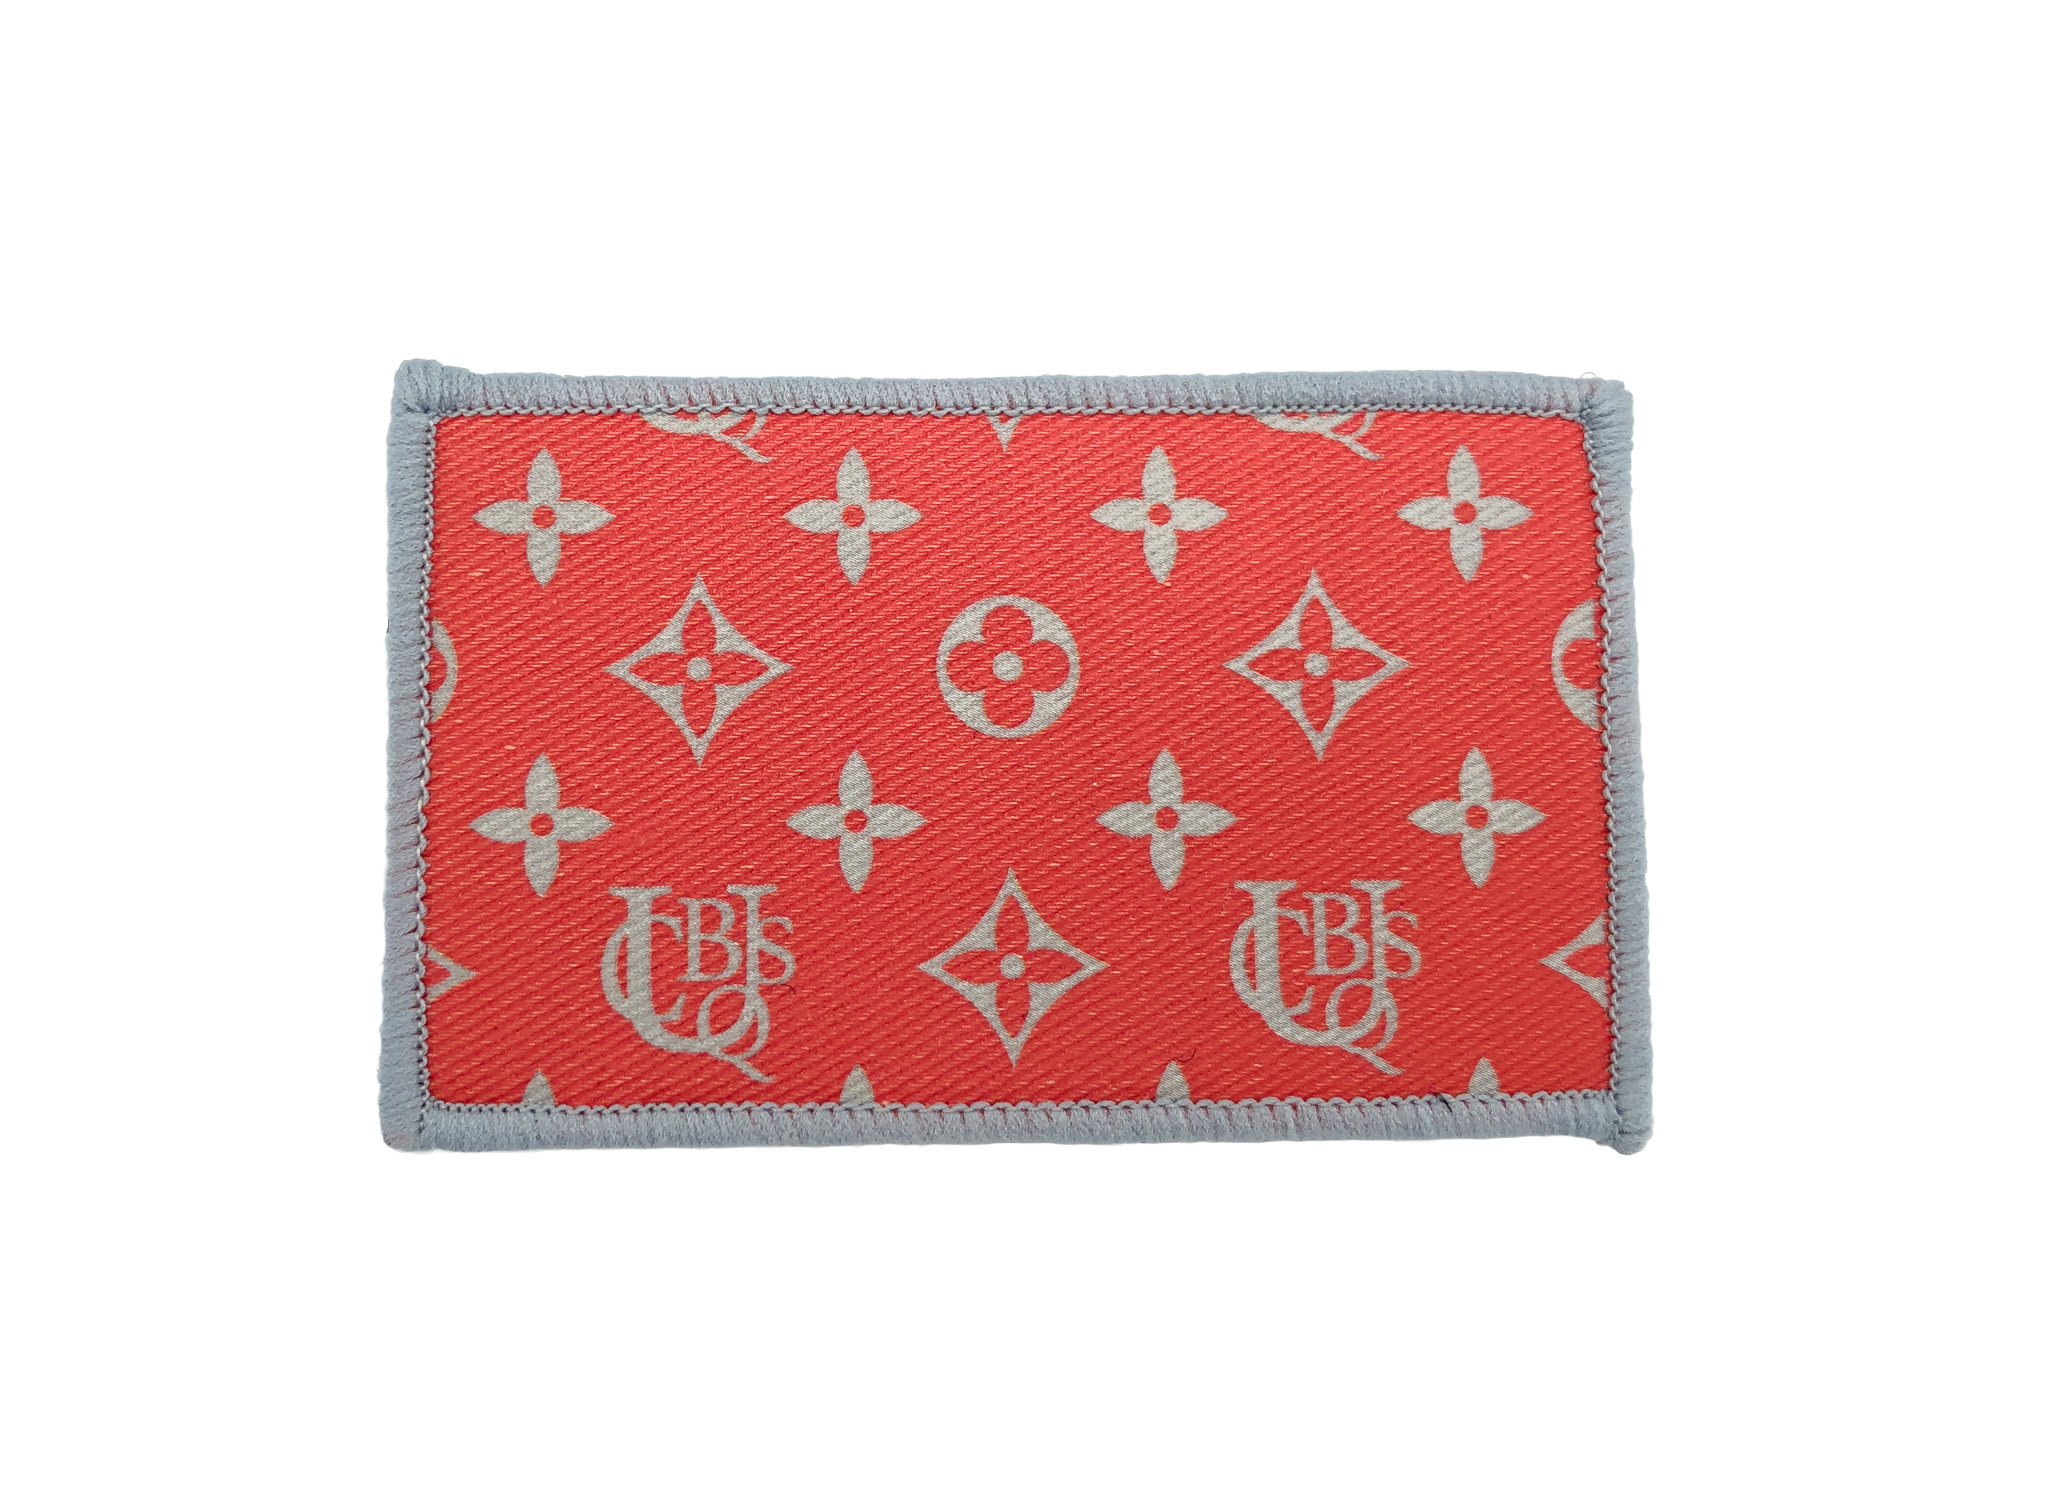 UCQBS-USC2013_Limited_Patch